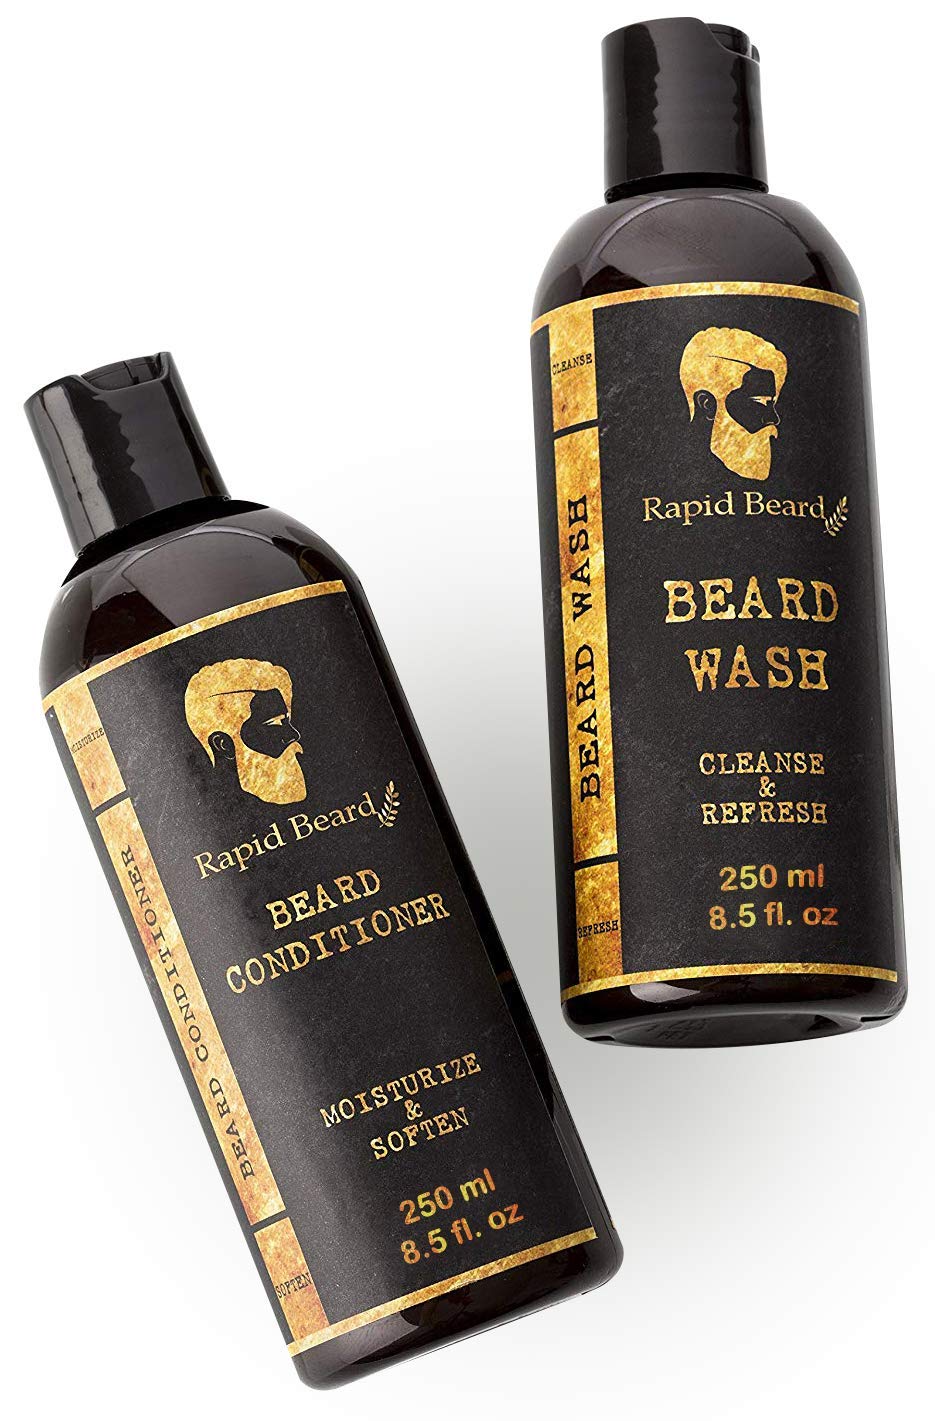 The Best Beard Shampoo and Conditioner Sets for Men